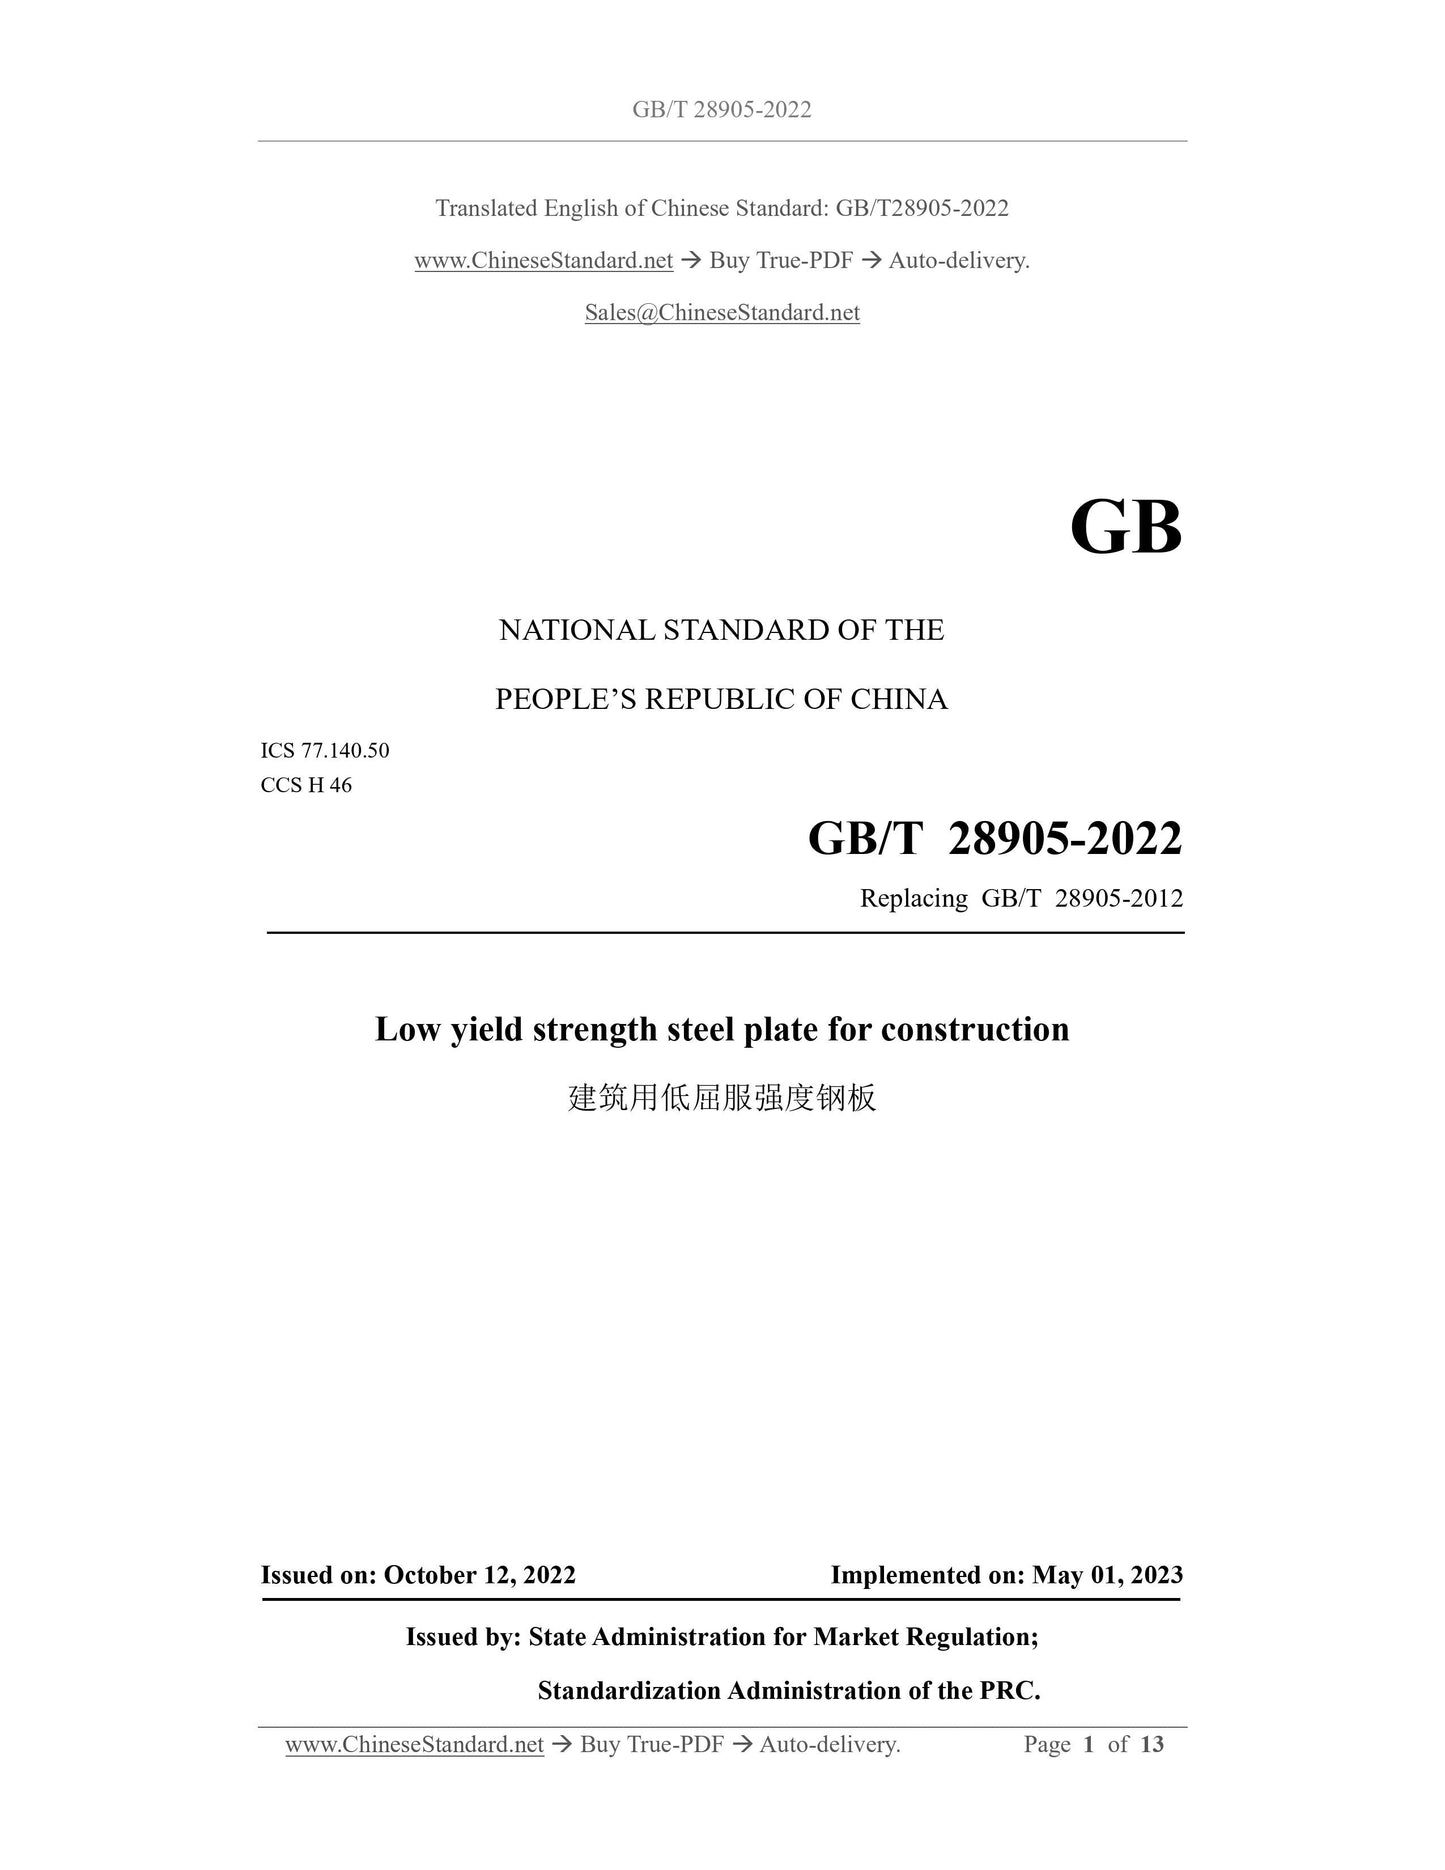 GB/T 28905-2022 Page 1